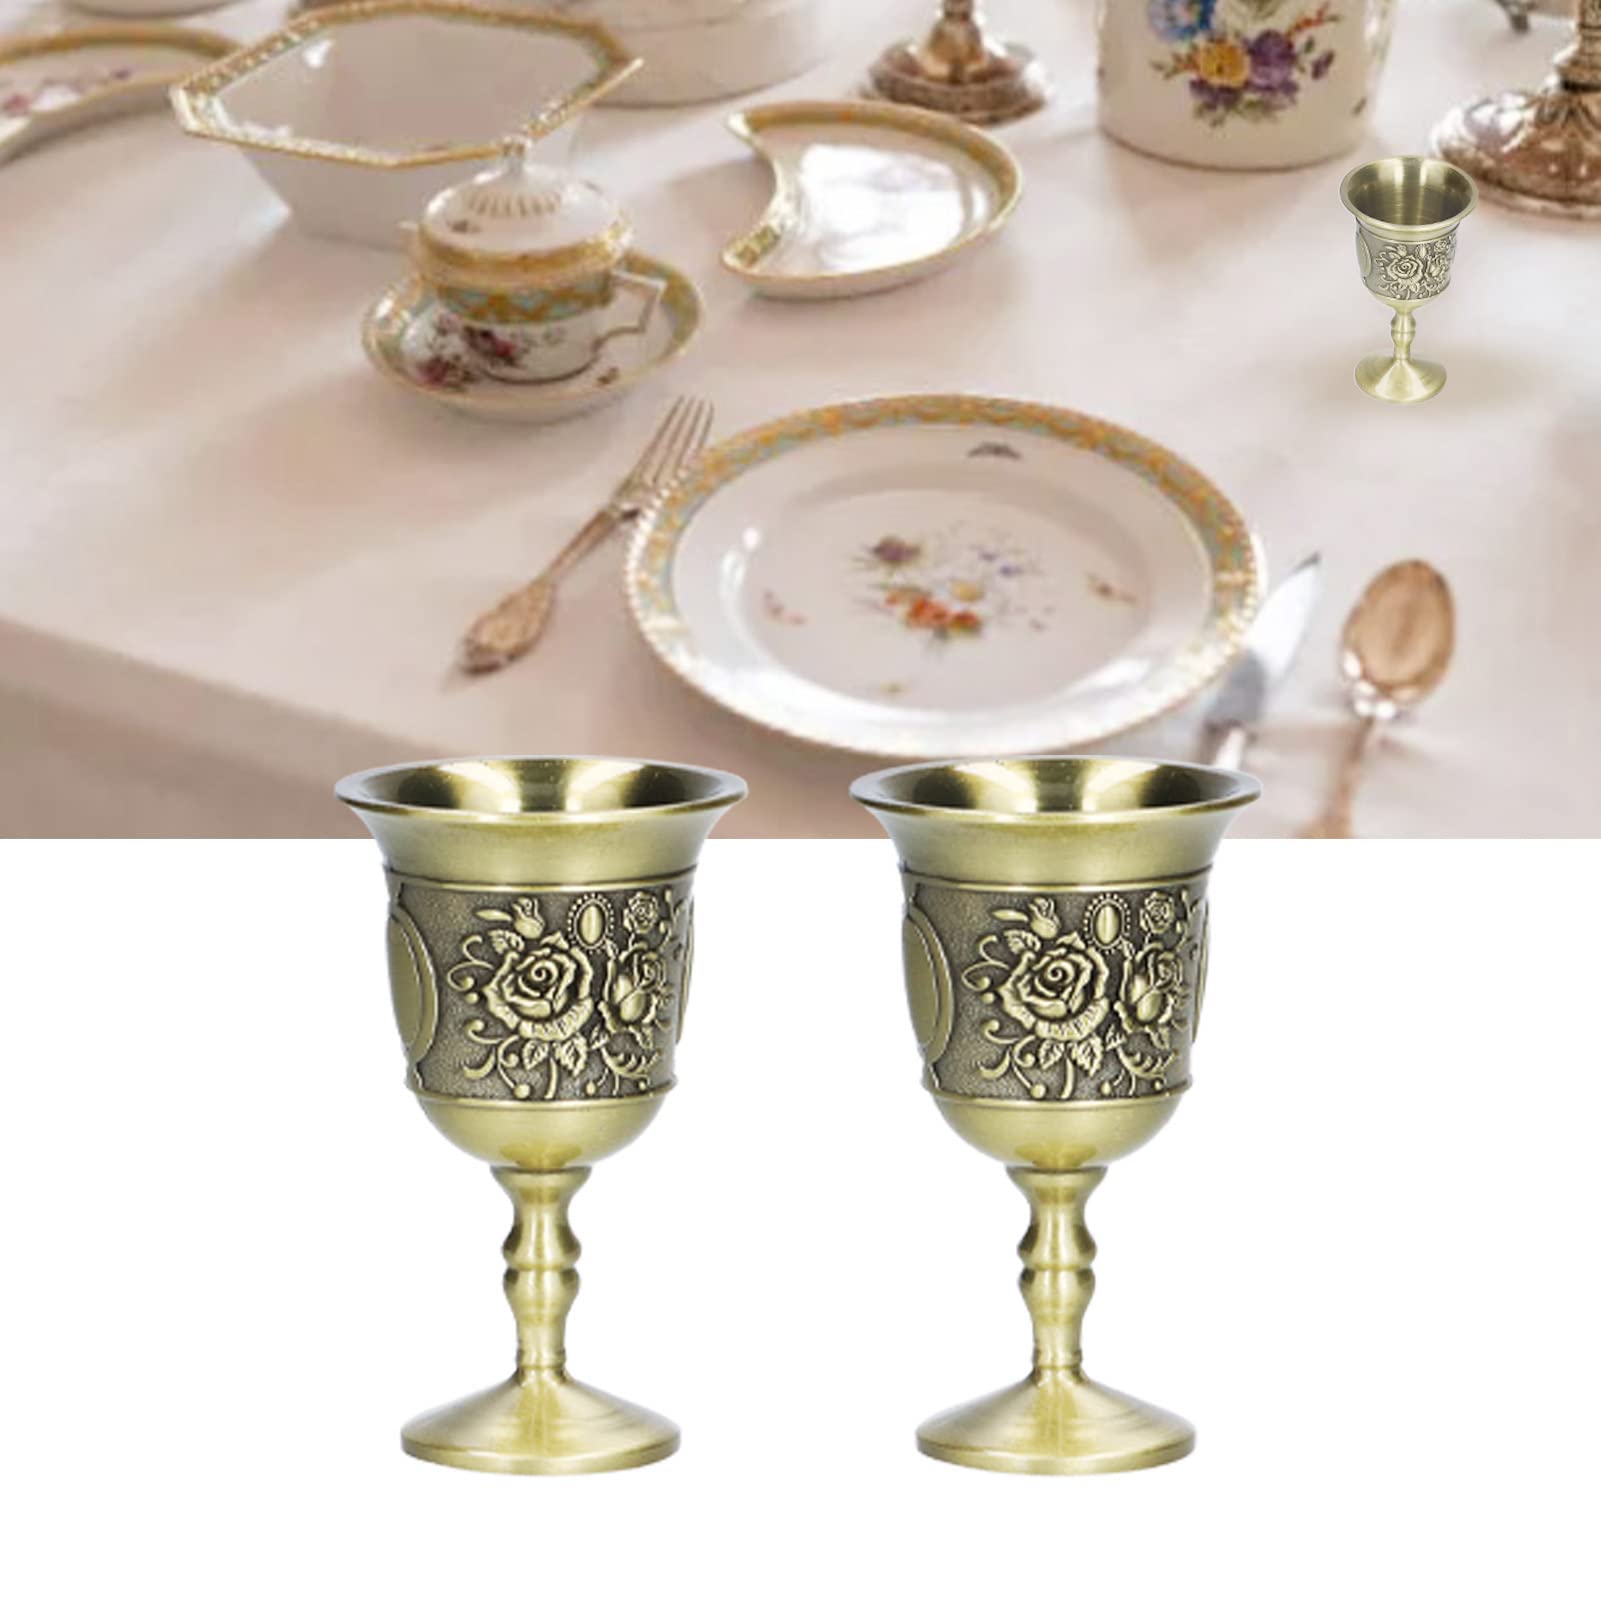 Jopwkuin Metal Drinking Glasses, Antique Goblet Wine Glass Luxury Small Wine Glass European Style Old Wine Glass for Weddings Home Decor Cup for Home Party Dinner Bar